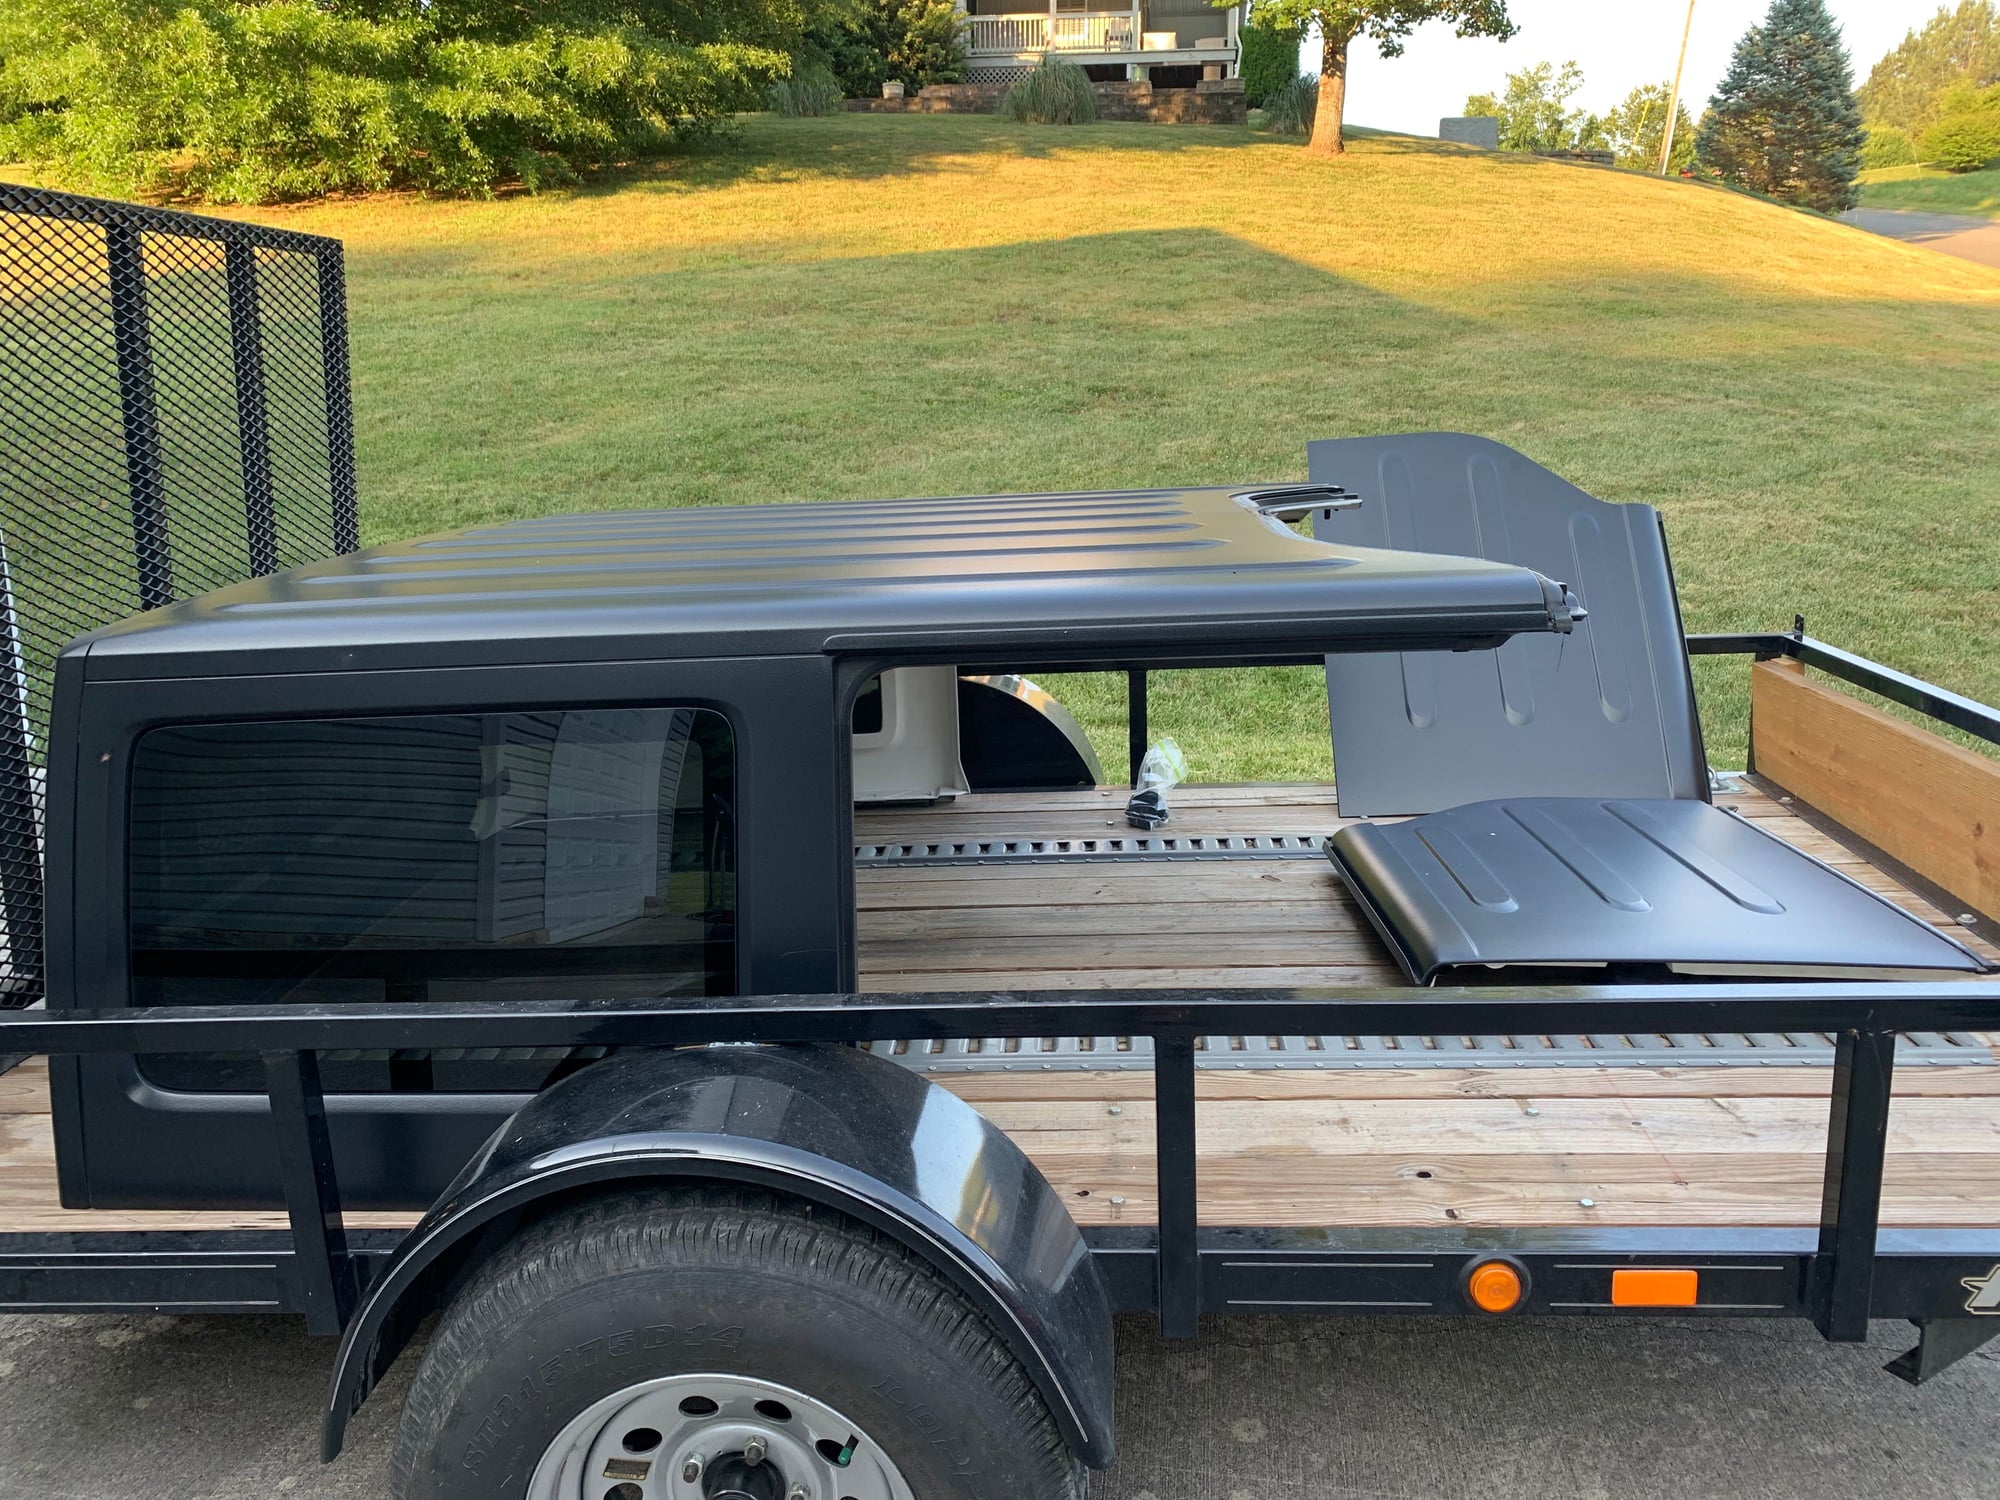 Exterior Body Parts - Jeep Jk Unlimited 3 piece Fredom Hardtop black - Used - 2007 to 2018 Jeep Wrangler - Sevierville, TN 37862, United States